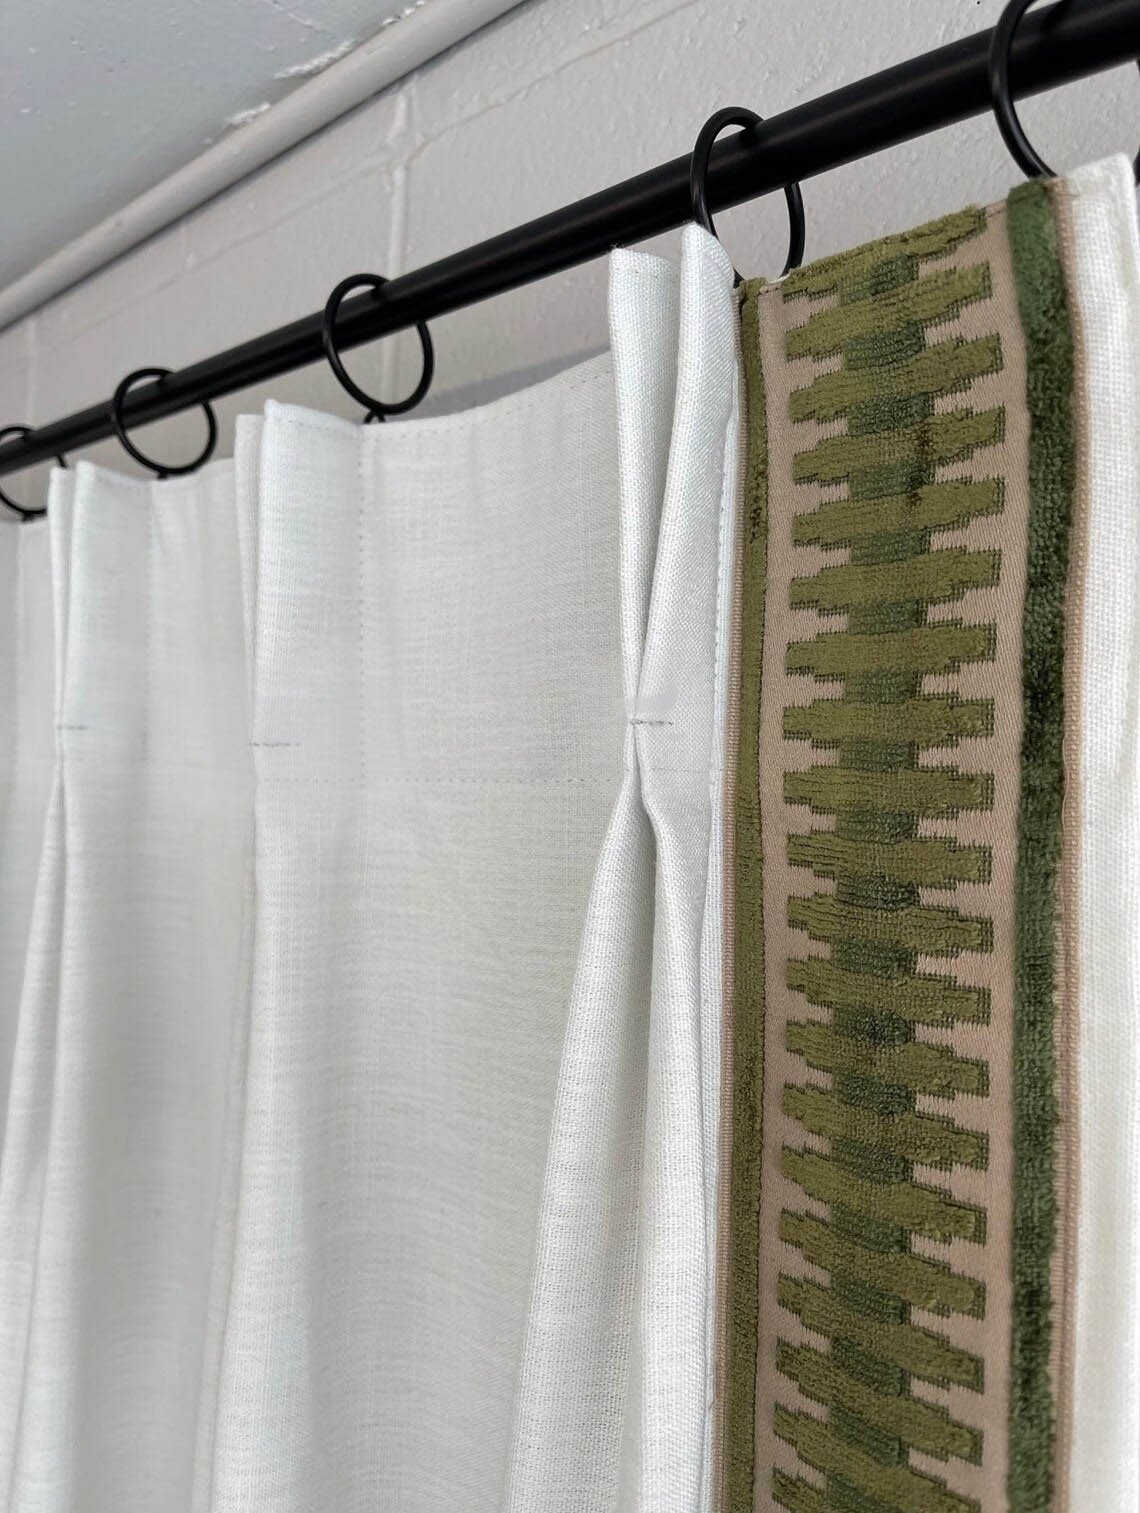 Linen Mix Euro Pinch Pleat wt Tape Fret Border Many colors of fabric and Trim Lined Curtain Panel designer Window treatment french drapery